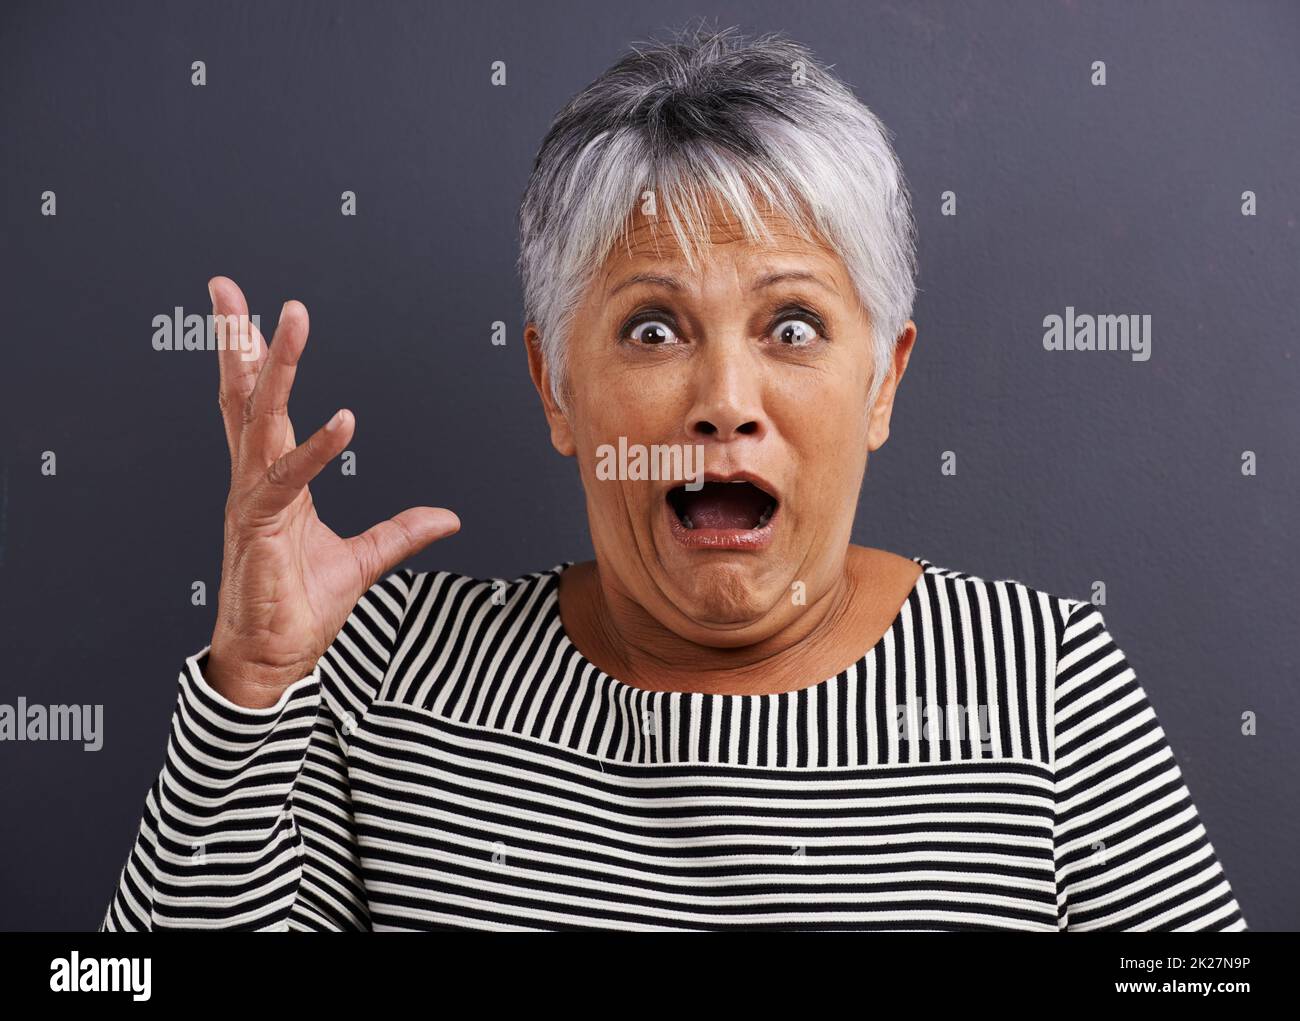 She Gets Scared Very Easily Portrait Of A Mature Woman With A Frightened Look On Her Face Stock